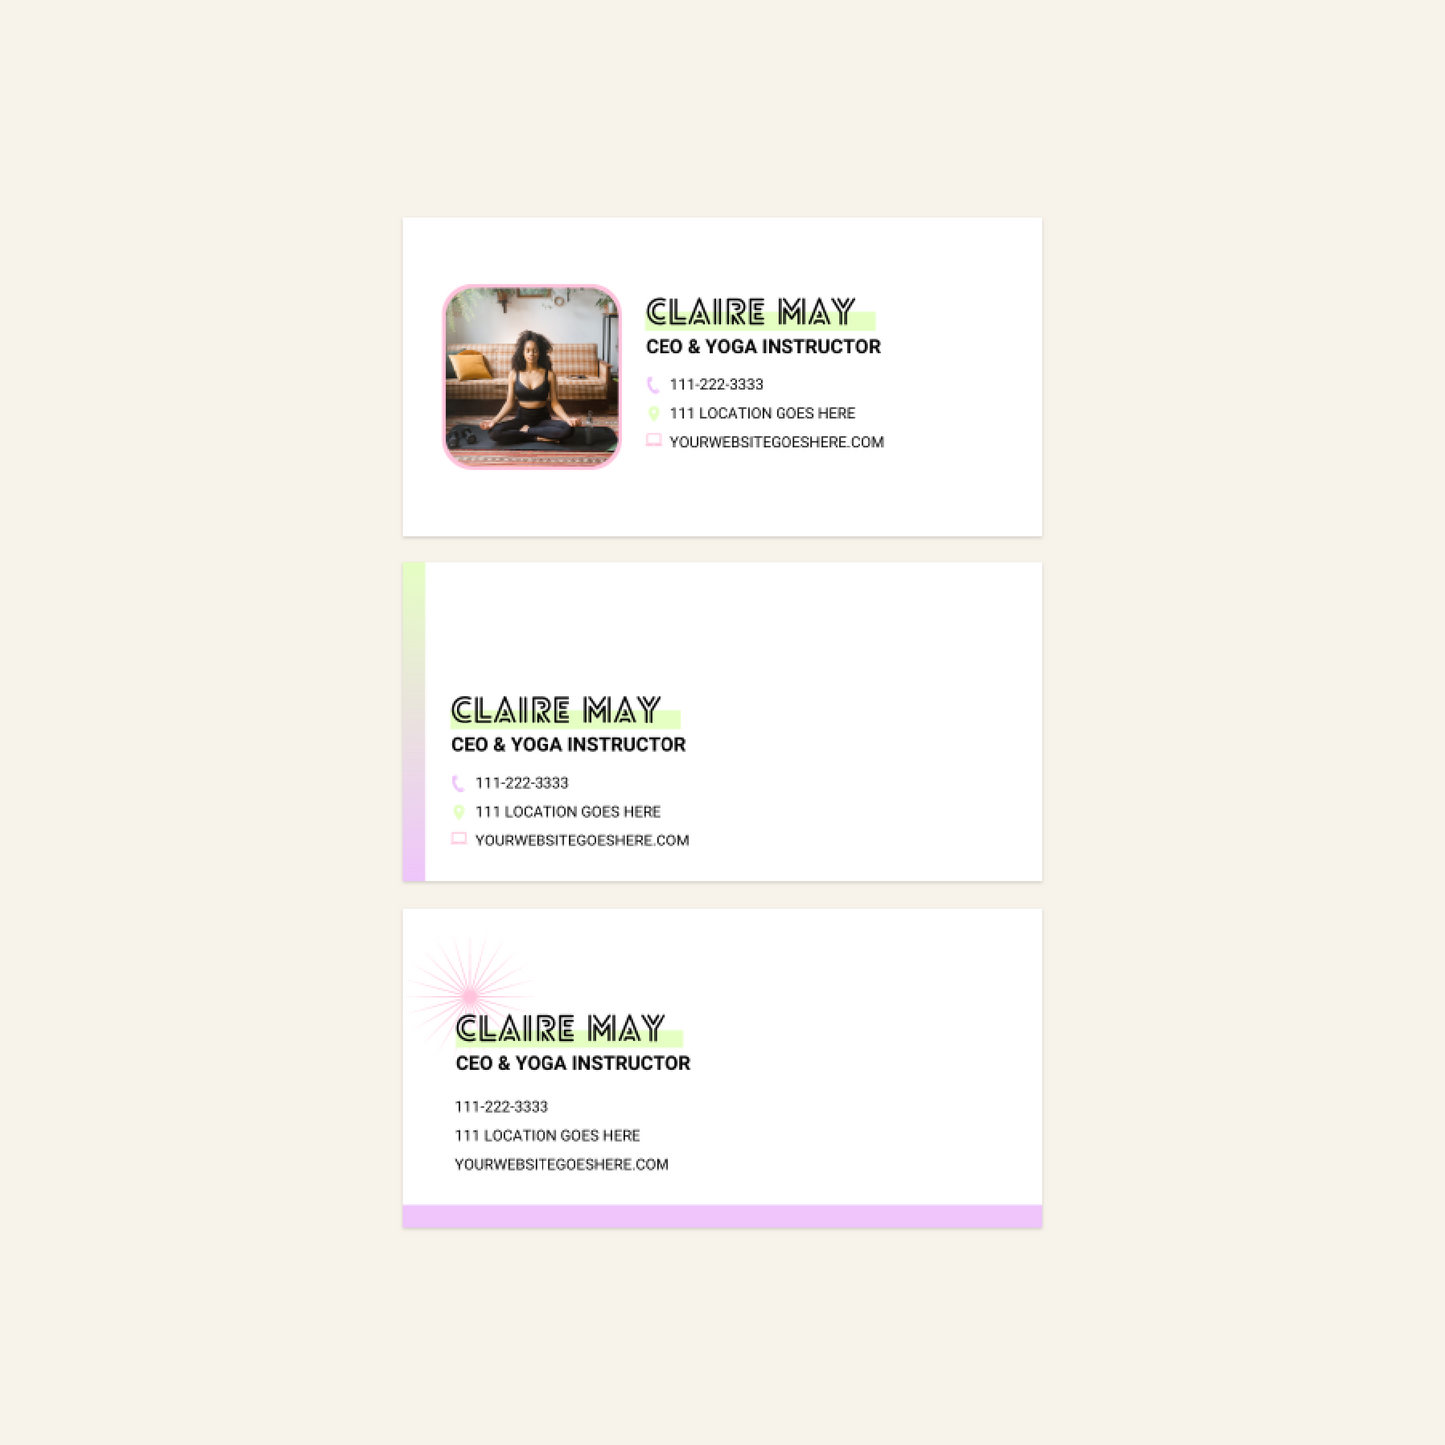 Claire - Email Signature Template